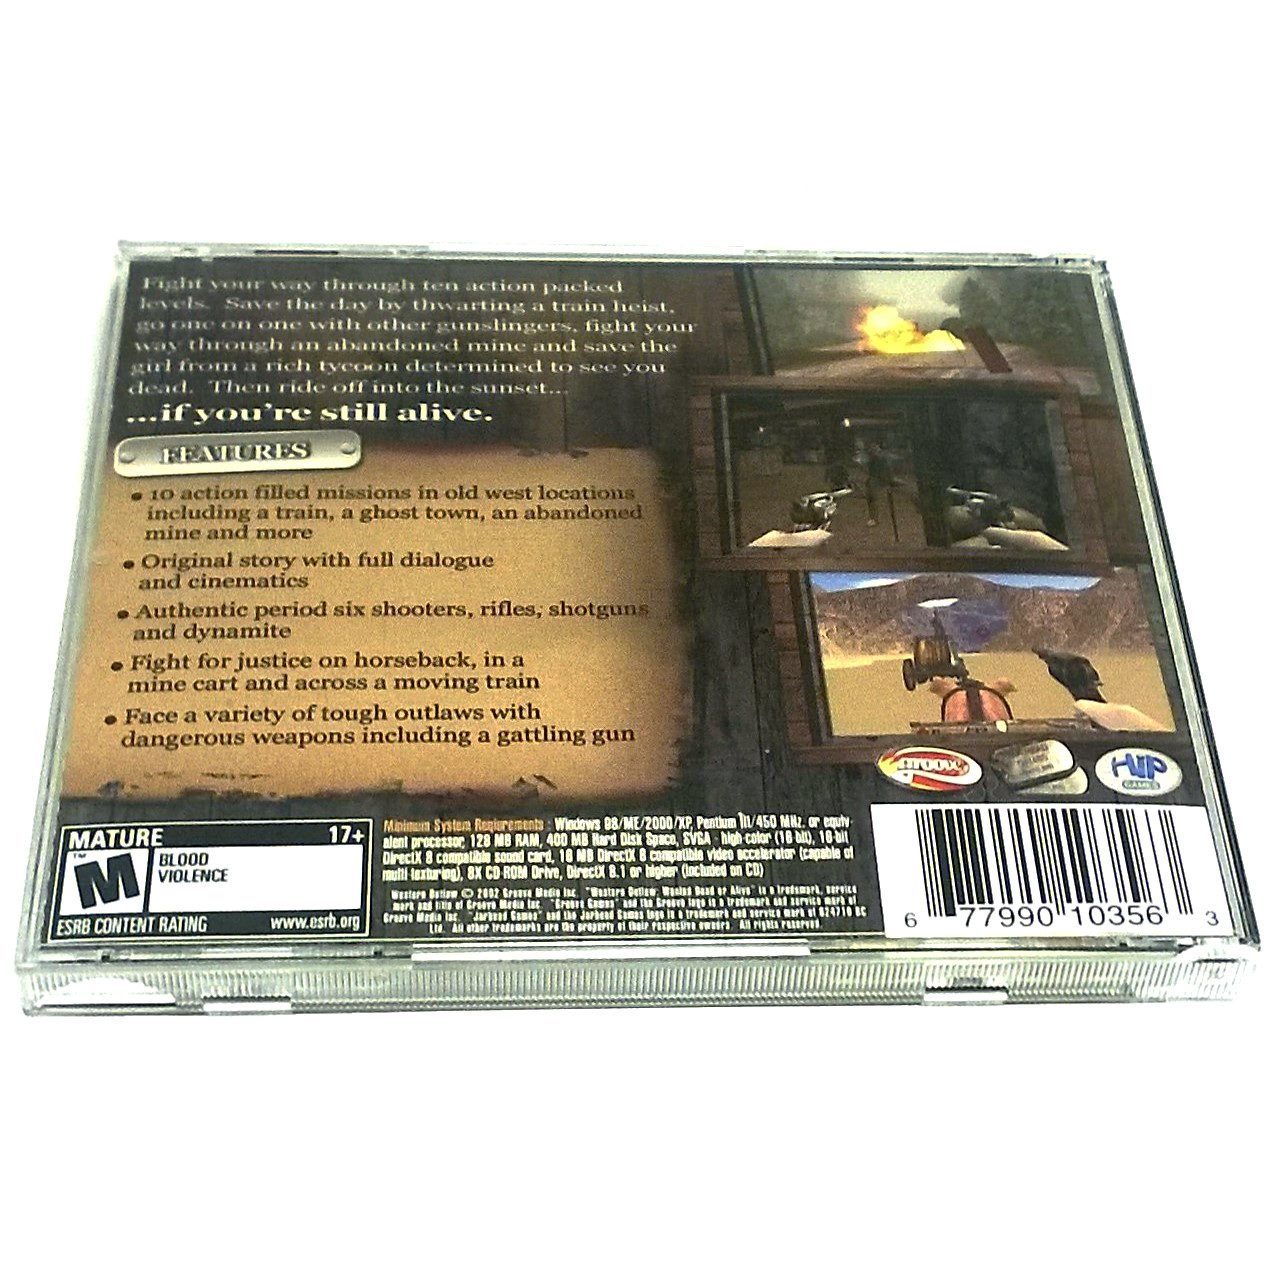 Western Outlaw: Wanted Dead or Alive for PC CD-ROM - Back of case